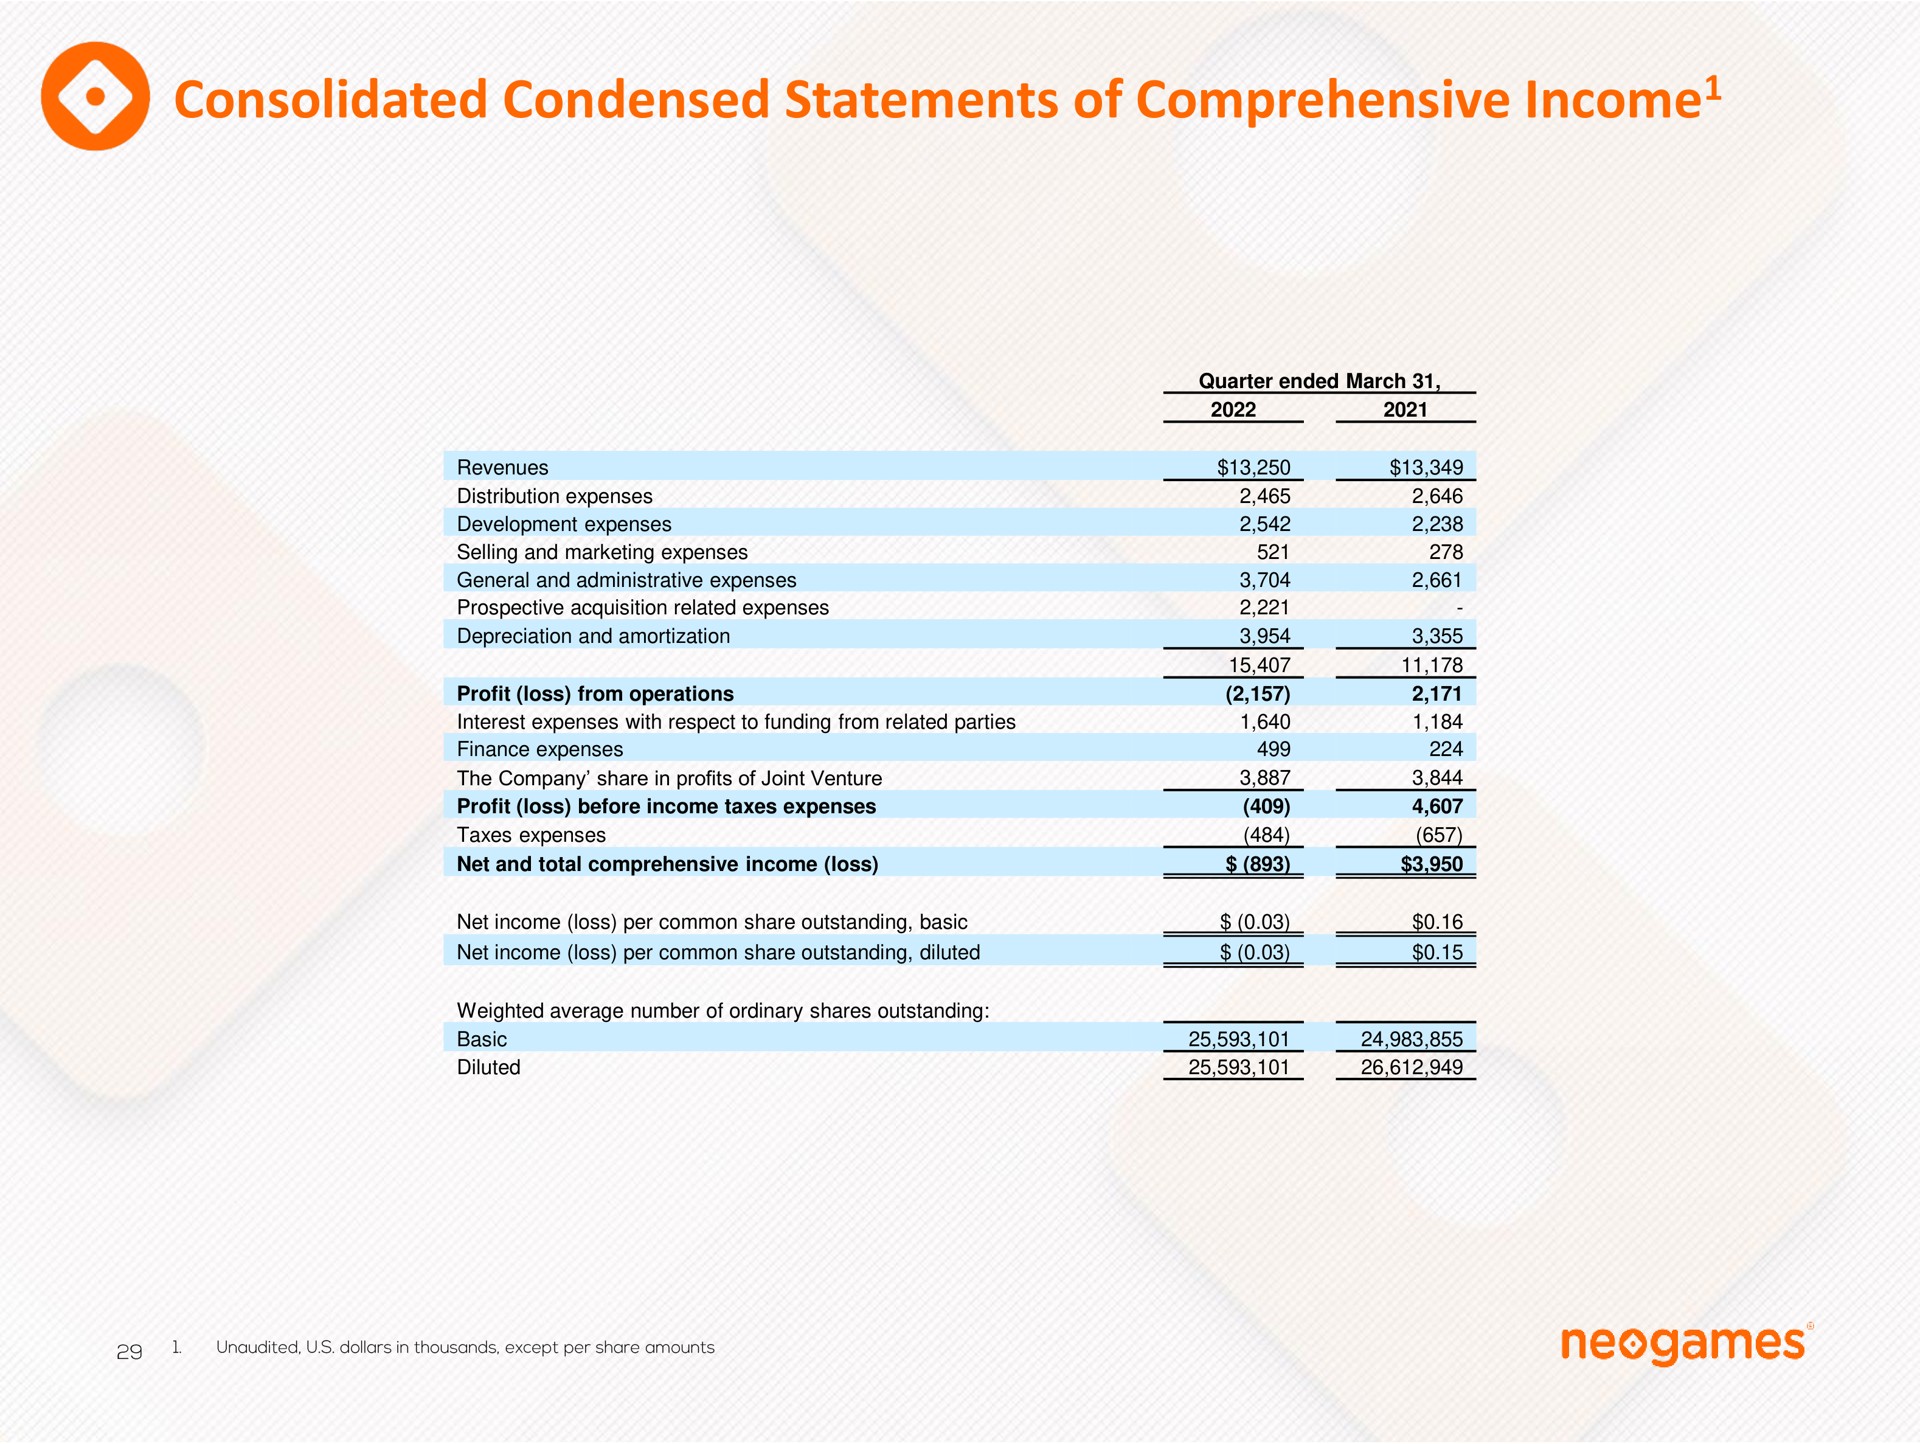 consolidated condensed statements of comprehensive income income | Neogames